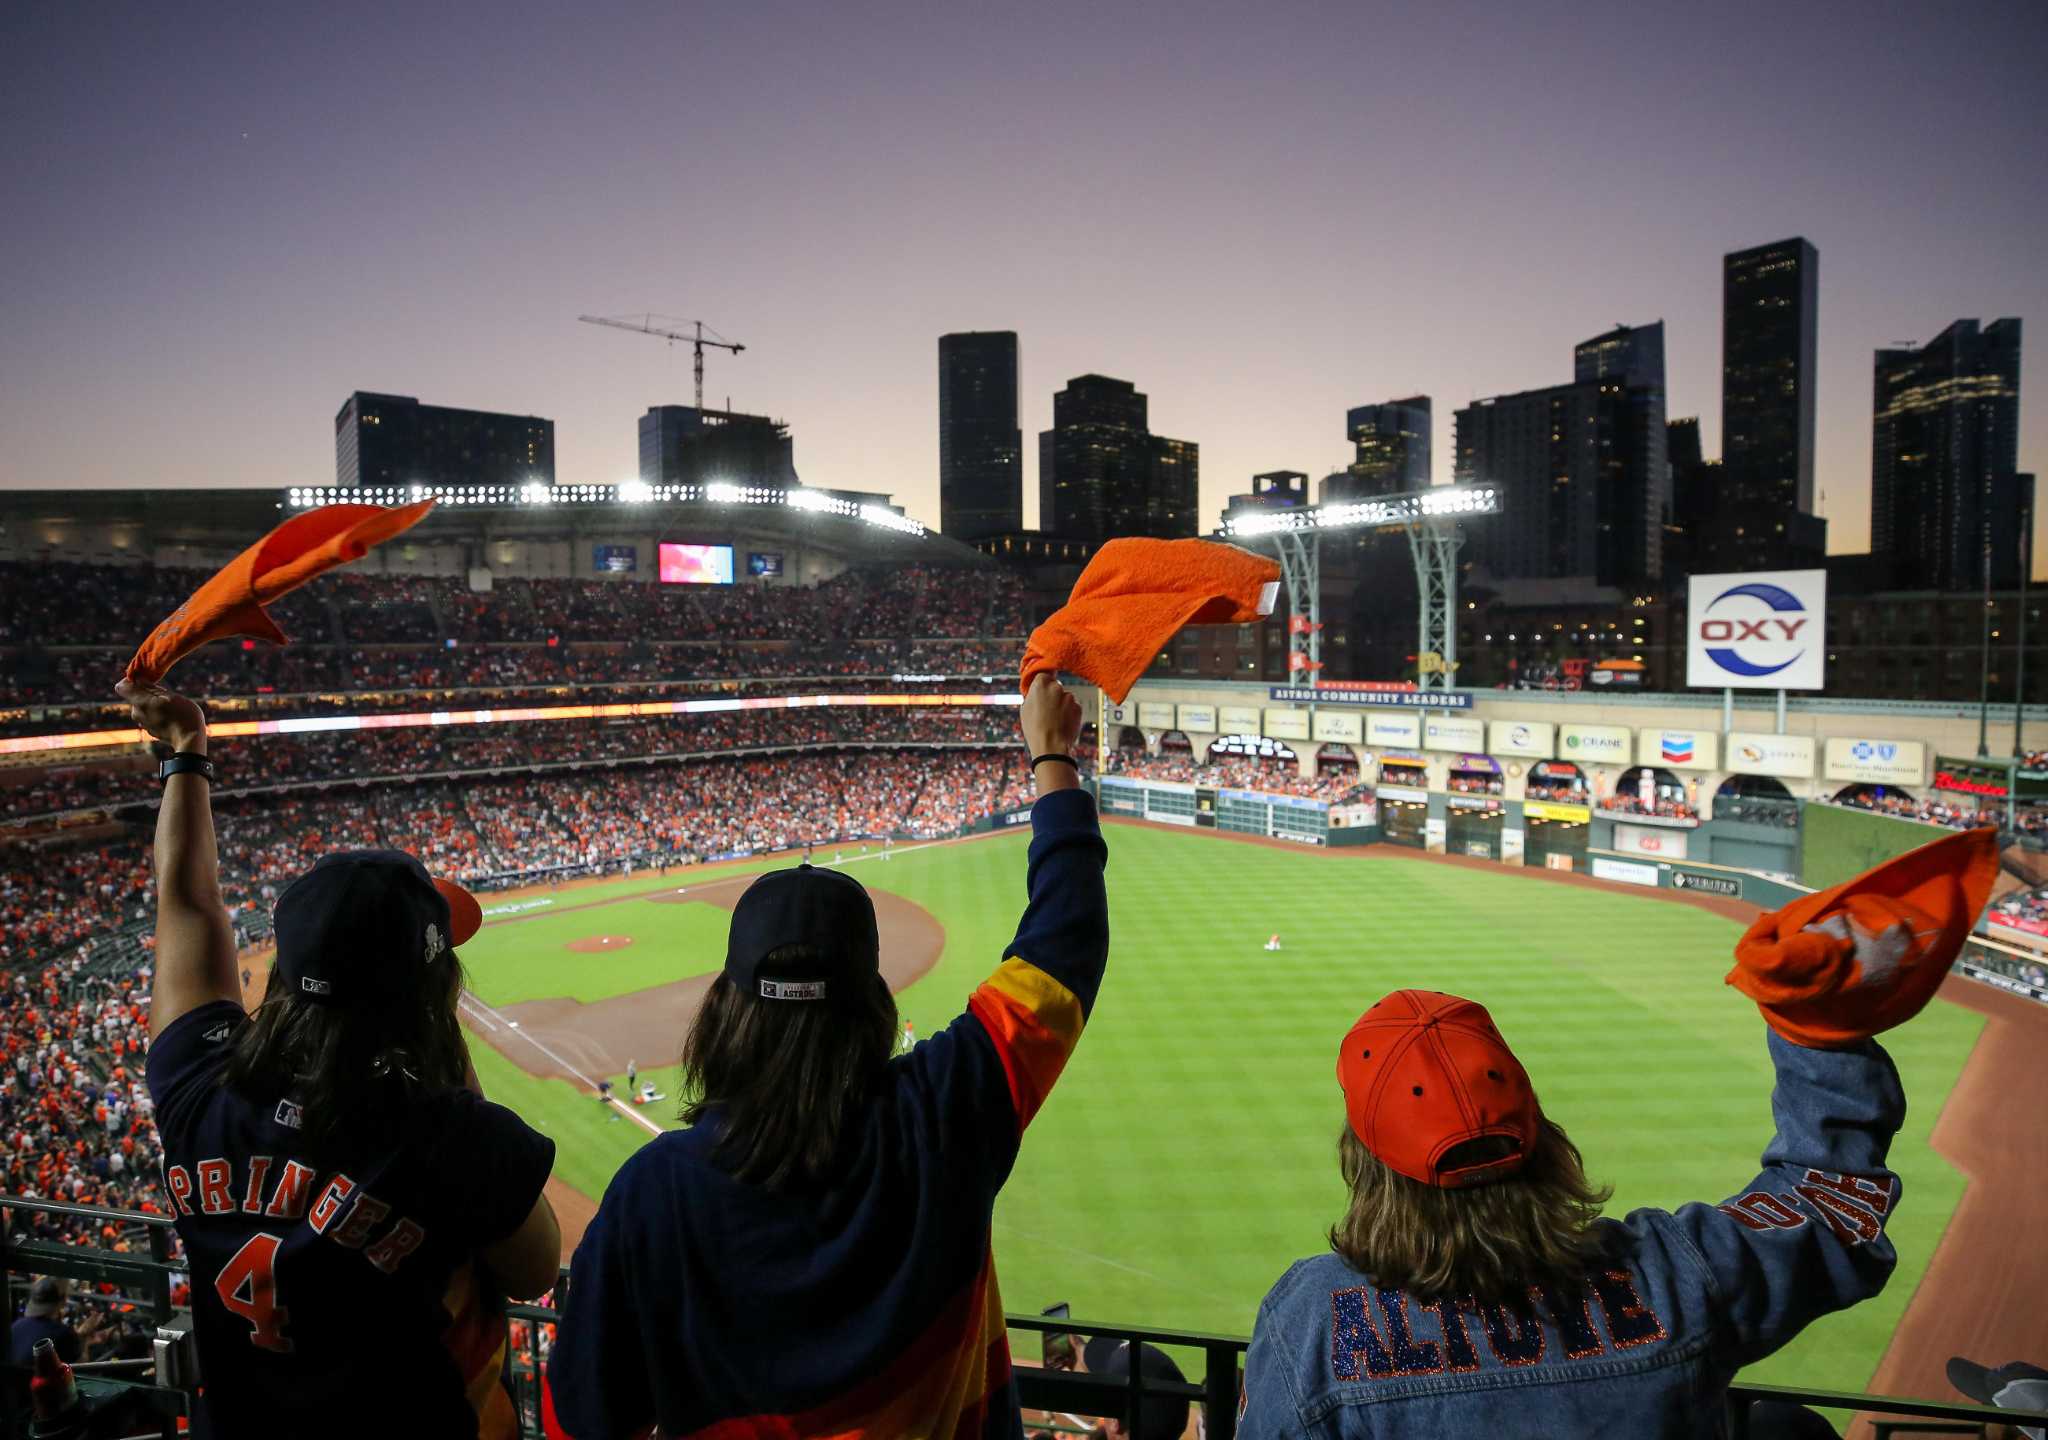 When Minute Maid Park's roof opens, some Astros fans enjoy the air